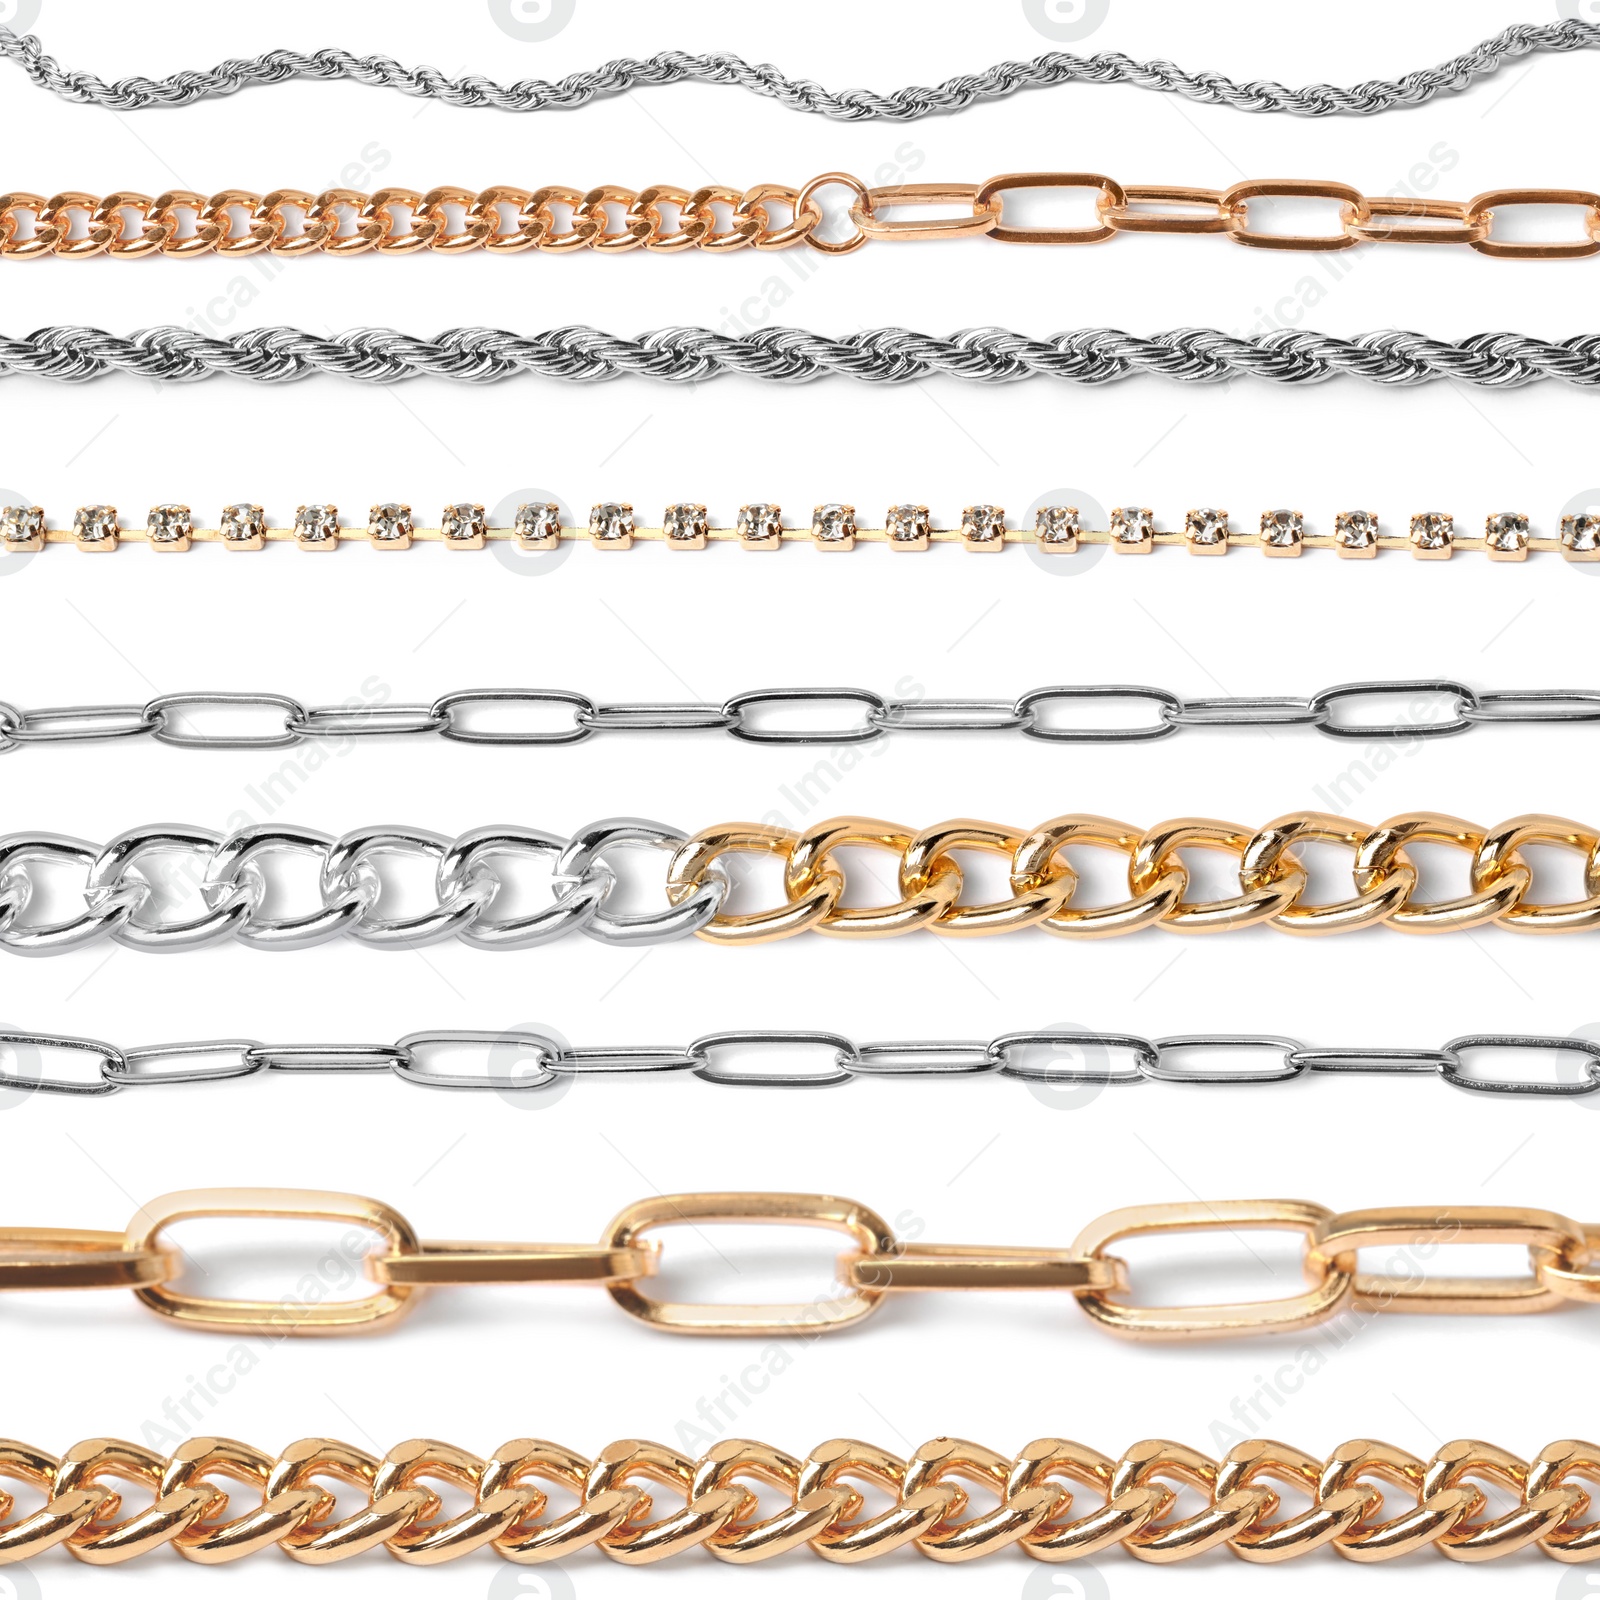 Image of Different jewellery chains isolated on white, collage design